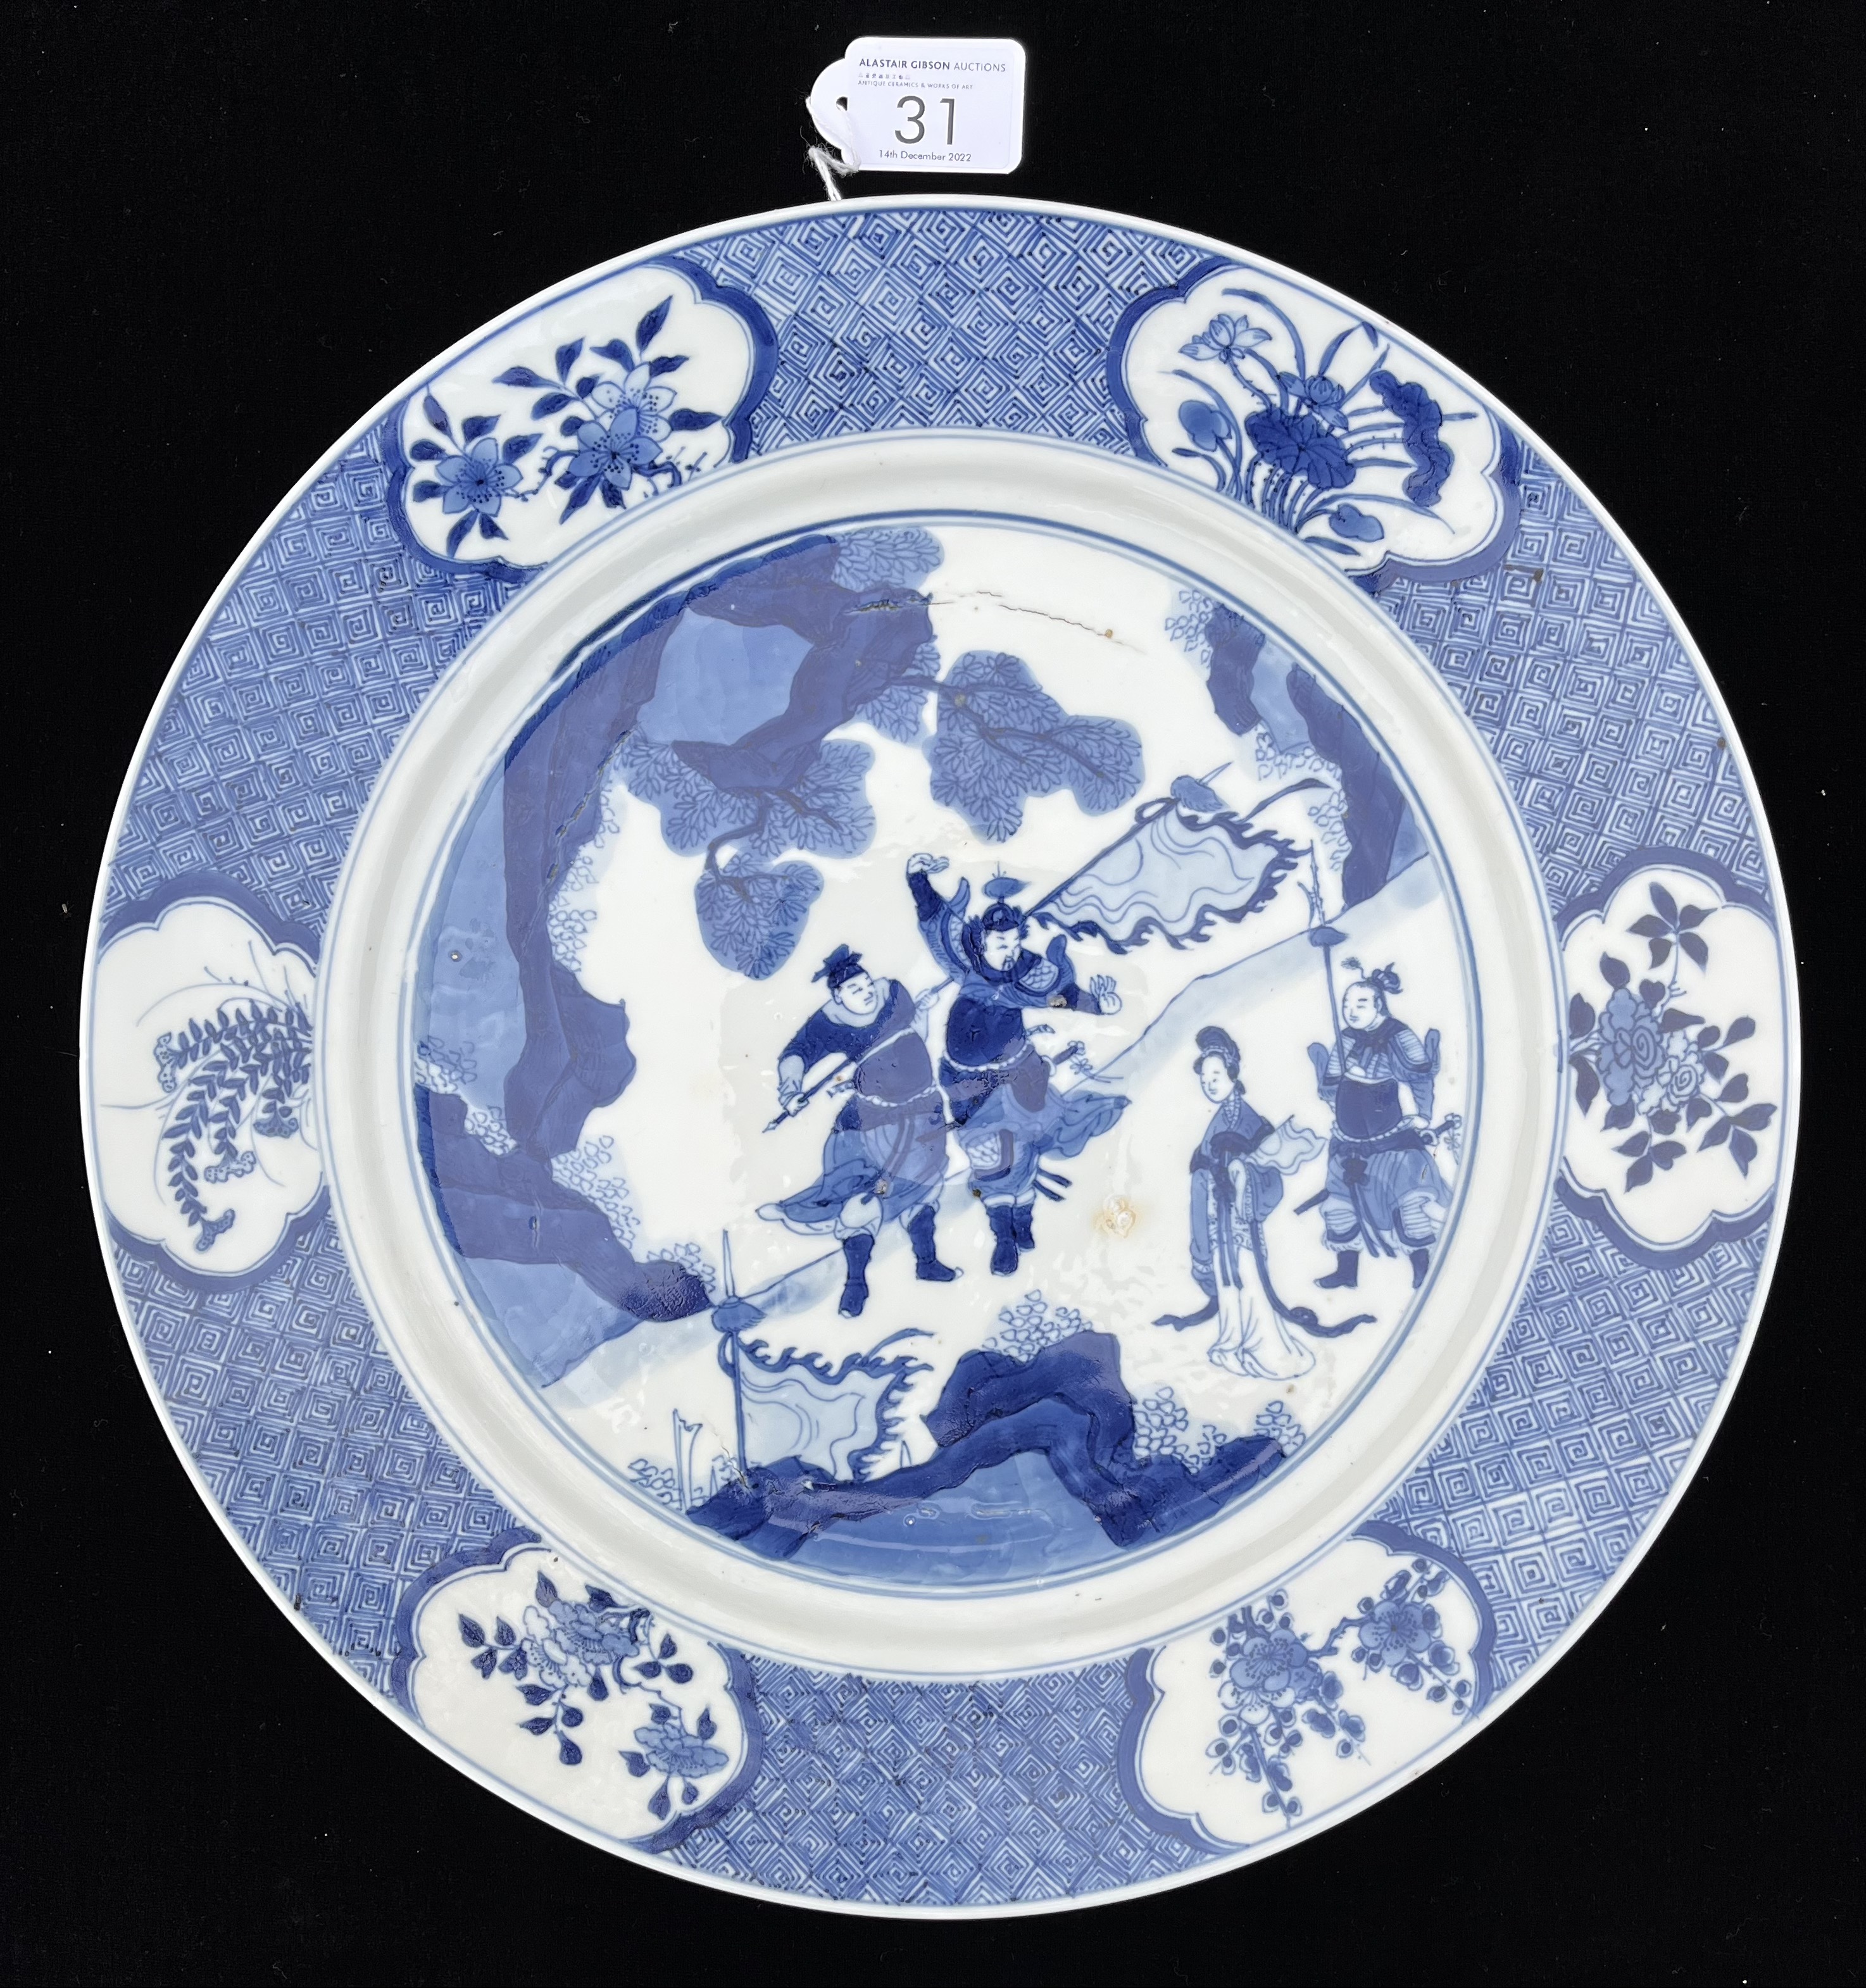 A LARGE CHINESE BLUE AND WHITE PORCELAIN DISH, QING DYNASTY, KANGXI PERIOD, 1662 – 1722 - Image 2 of 4